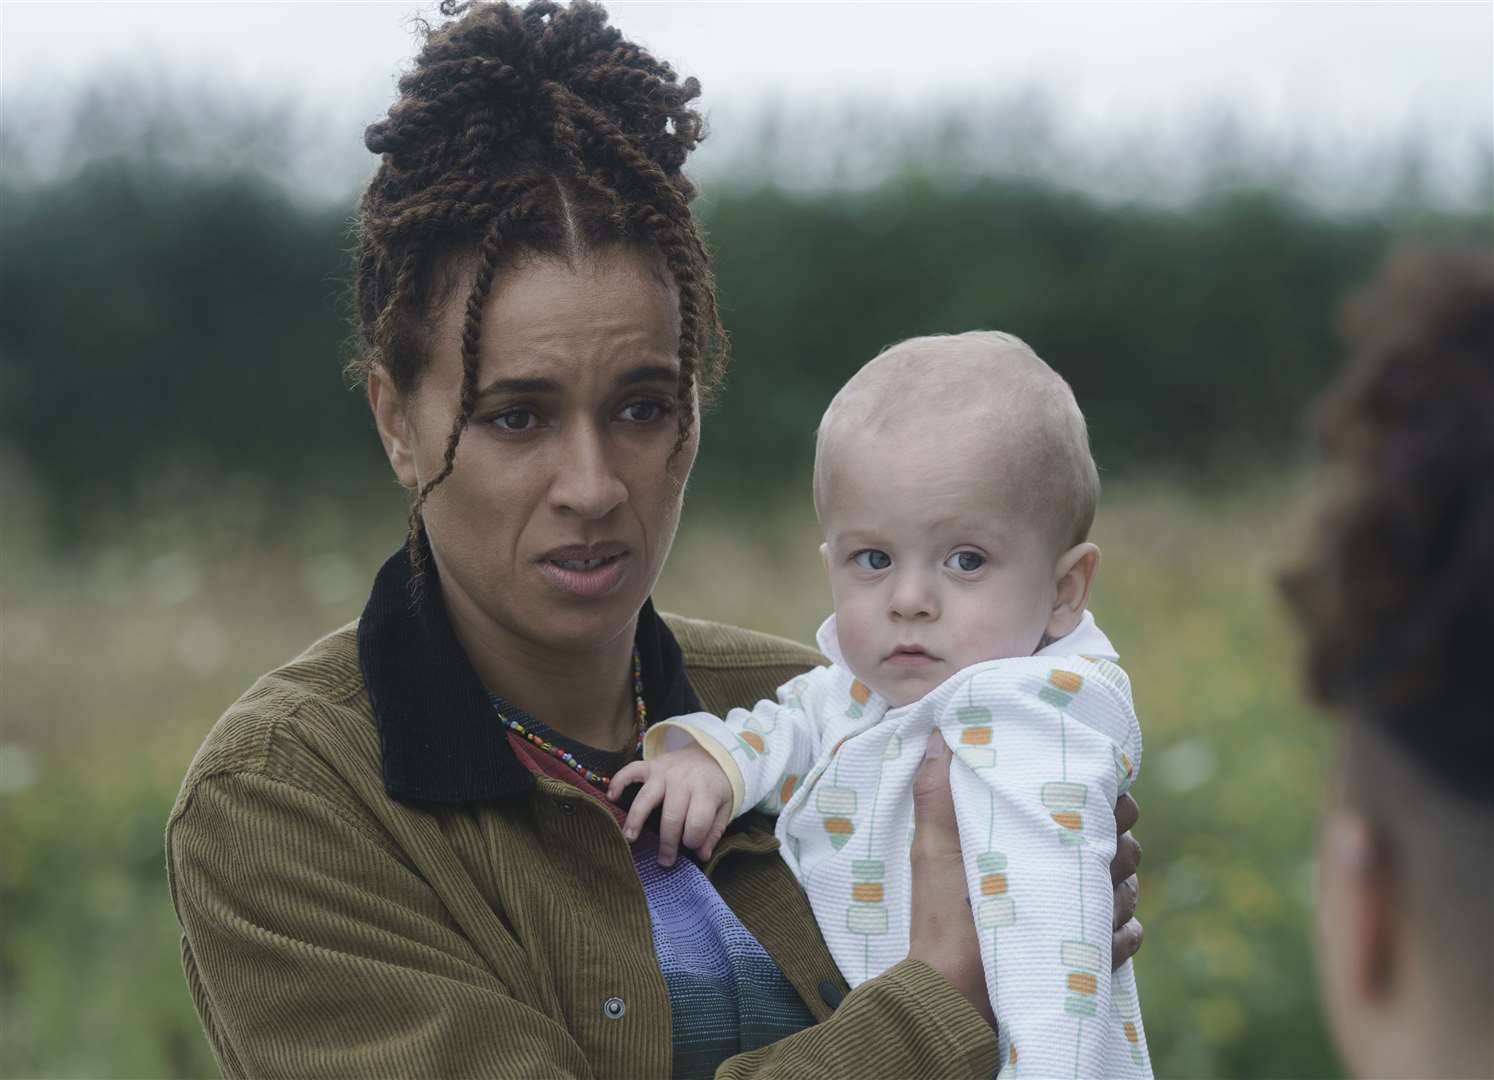 Michelle De Swarte stars as 38-year-old Natasha in the new comedy-horror series, "The Baby". Photo: ©Sky UK Ltd.